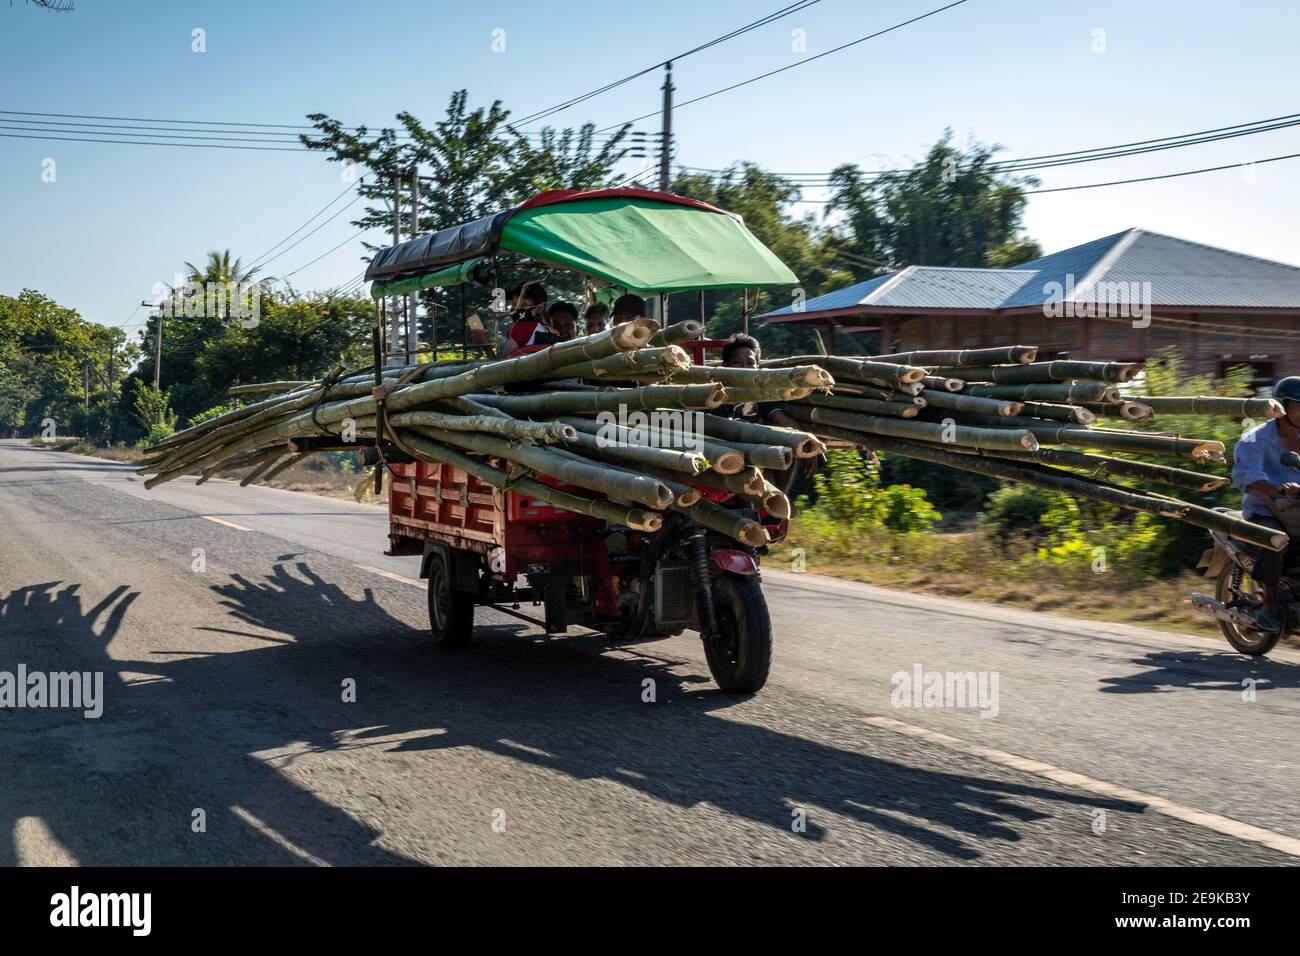 Transportation possibilities on the roads around Myikyina in northern Myanmar, where refugees have been living in IDP refugee camps for many years. Stock Photo